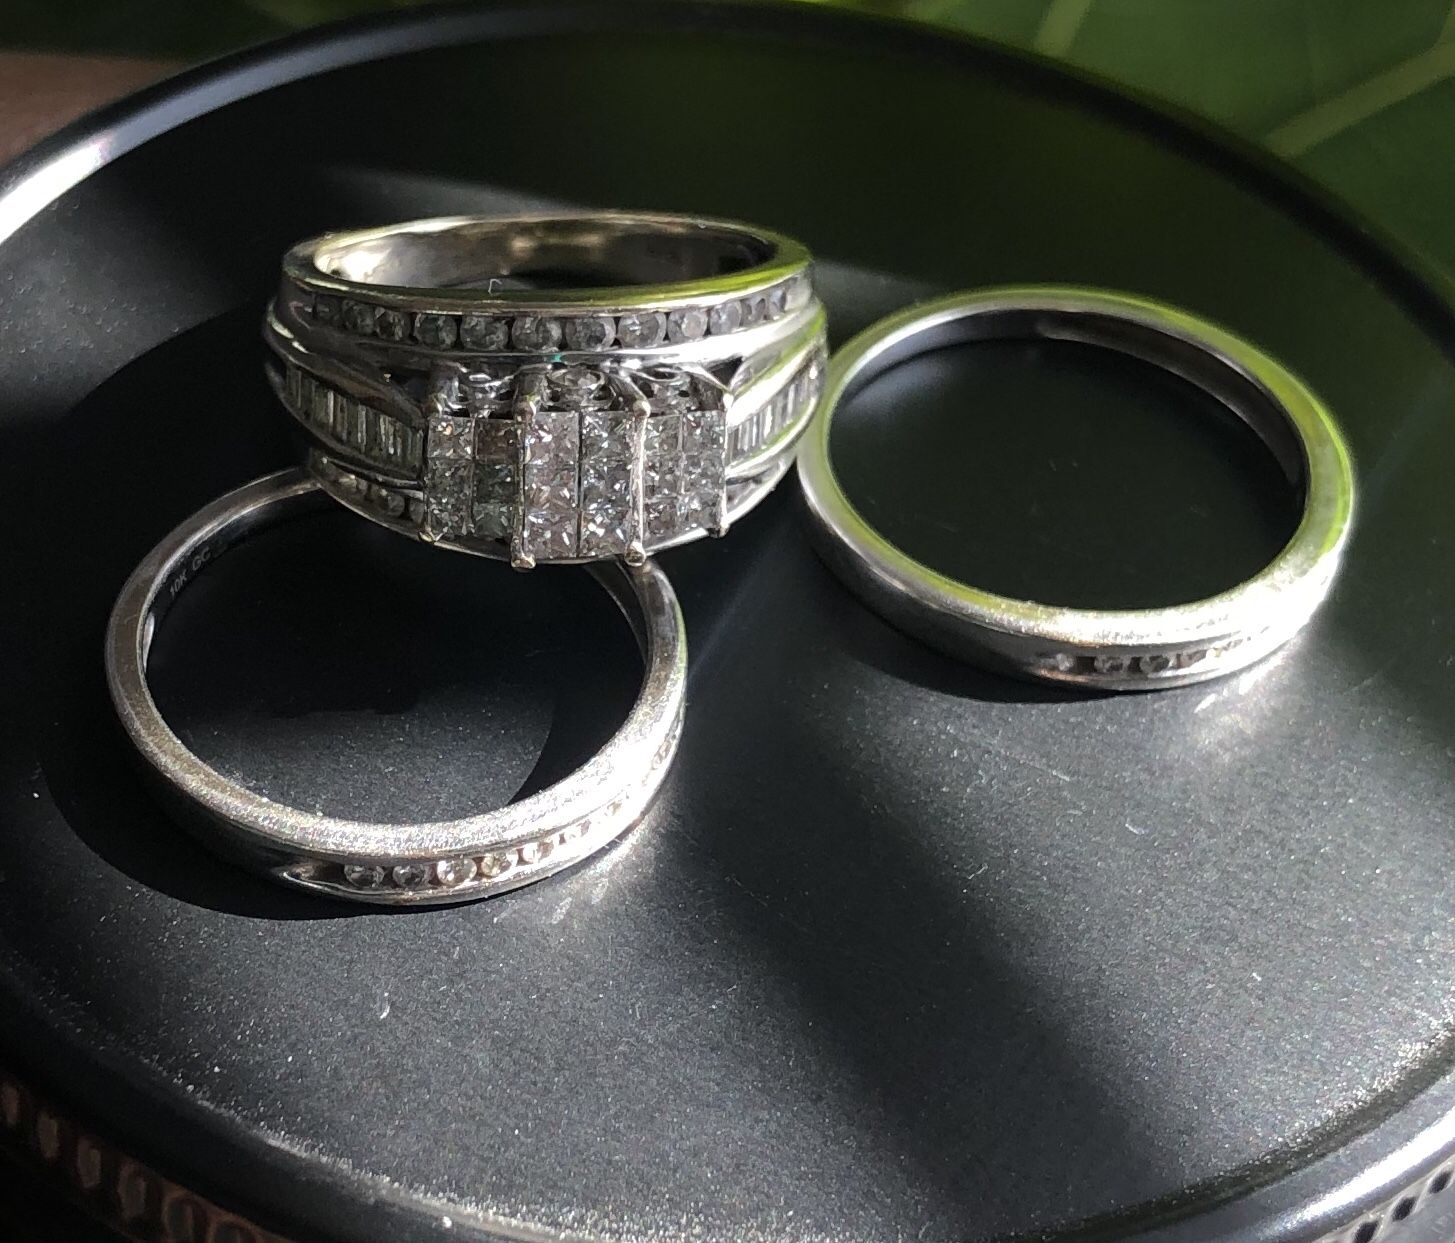 10k wedding ring and bands $500